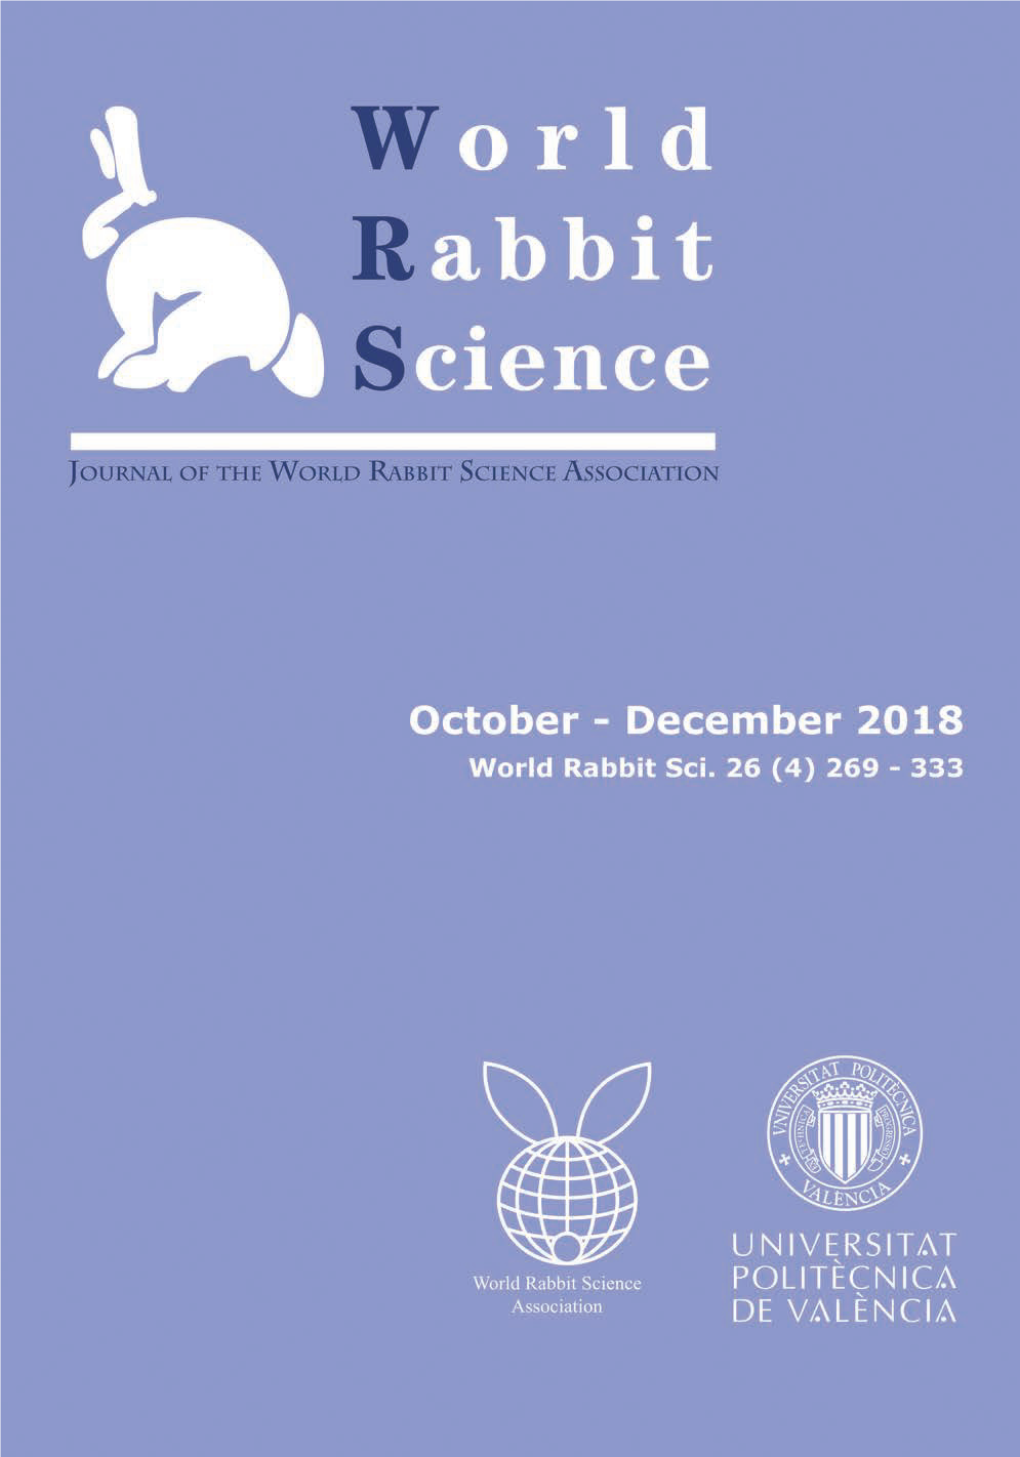 World Rabbit Science Is the O§Cial Journal of the World J.J